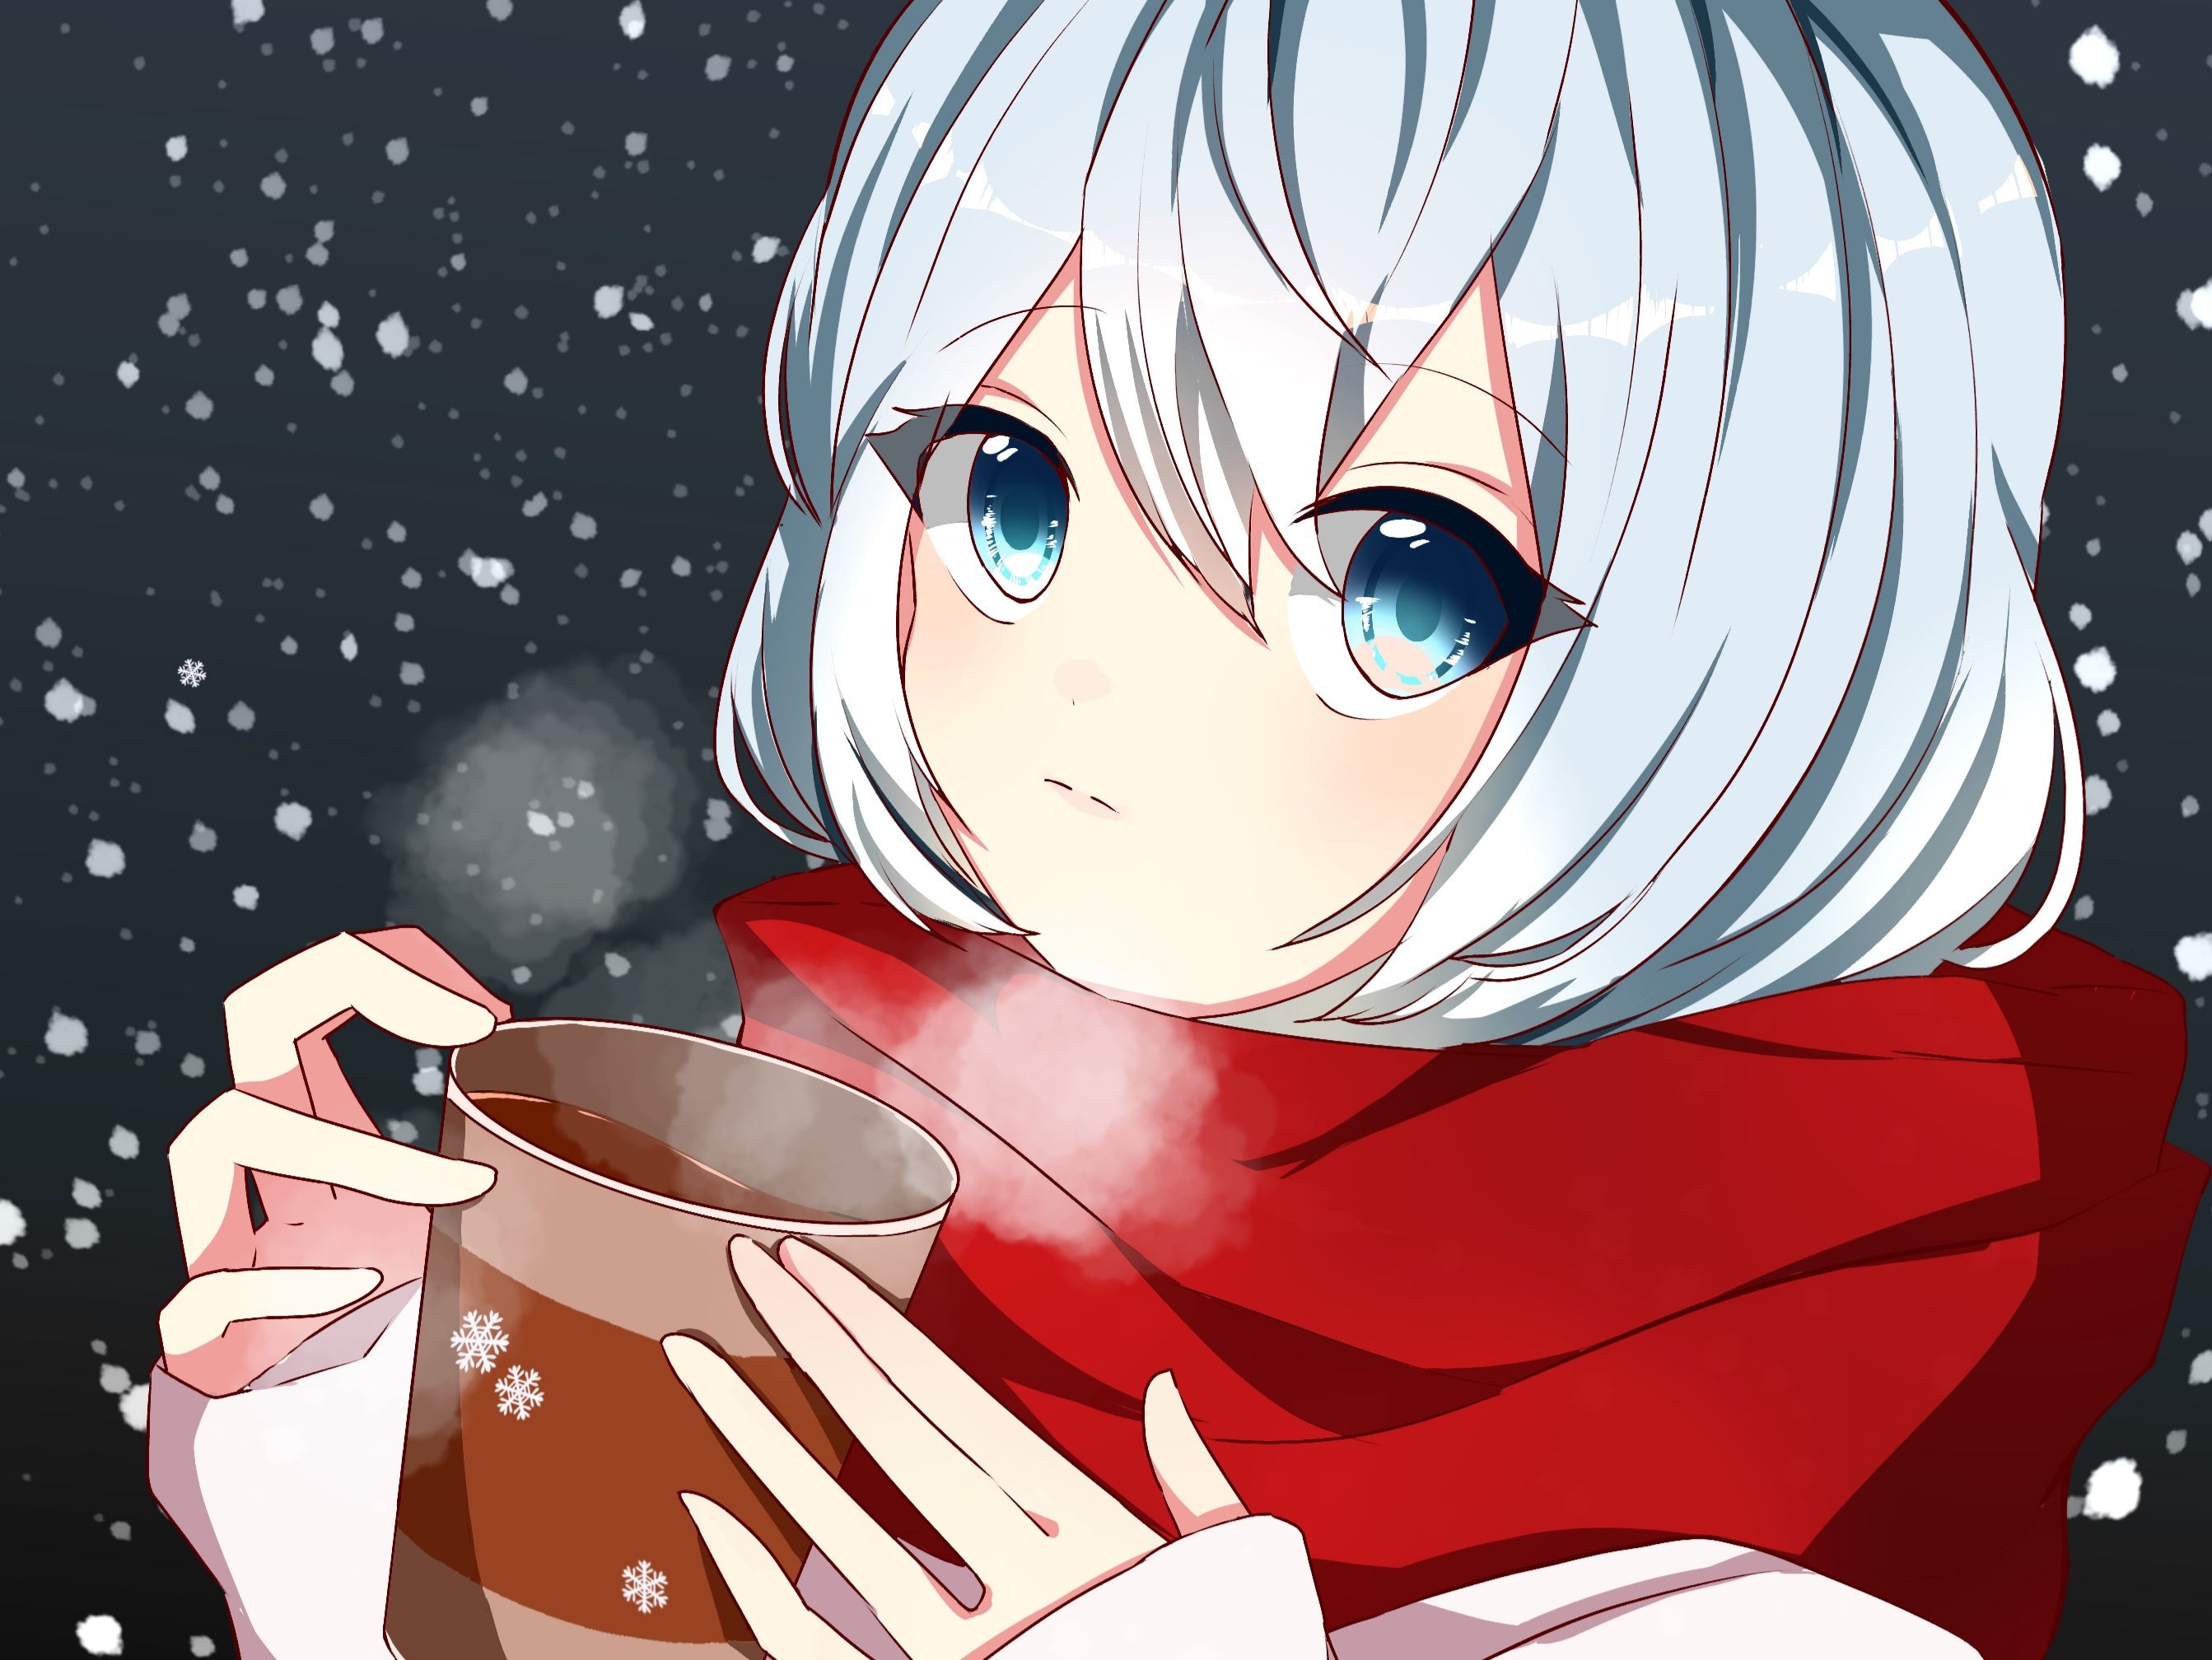 Anime girl drinking hot chocolate on a cold snowy night HD Wallpaper